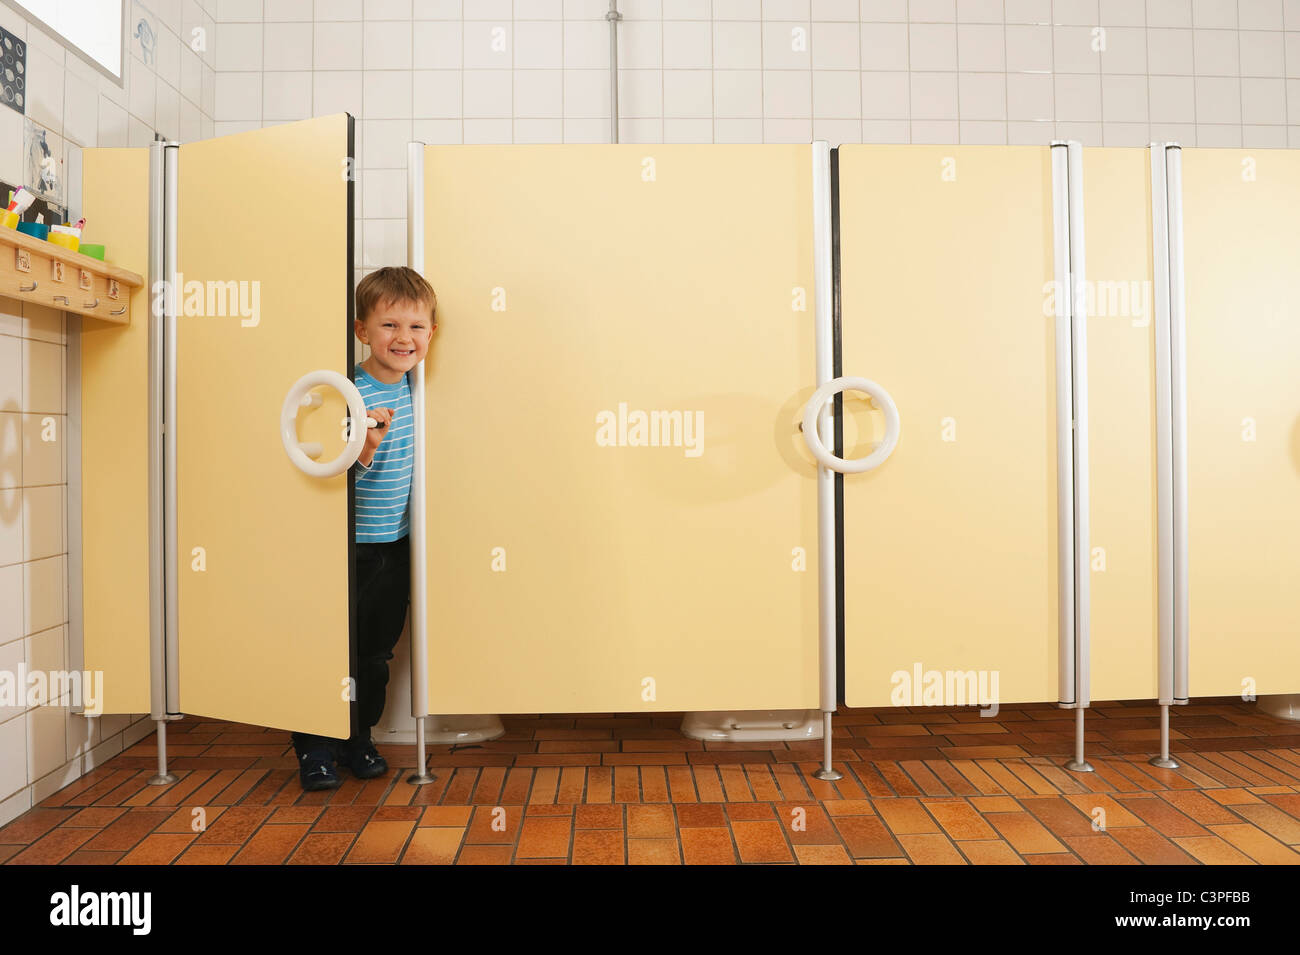 Toilette Kindergarten High Resolution Stock Photography and Images - Alamy